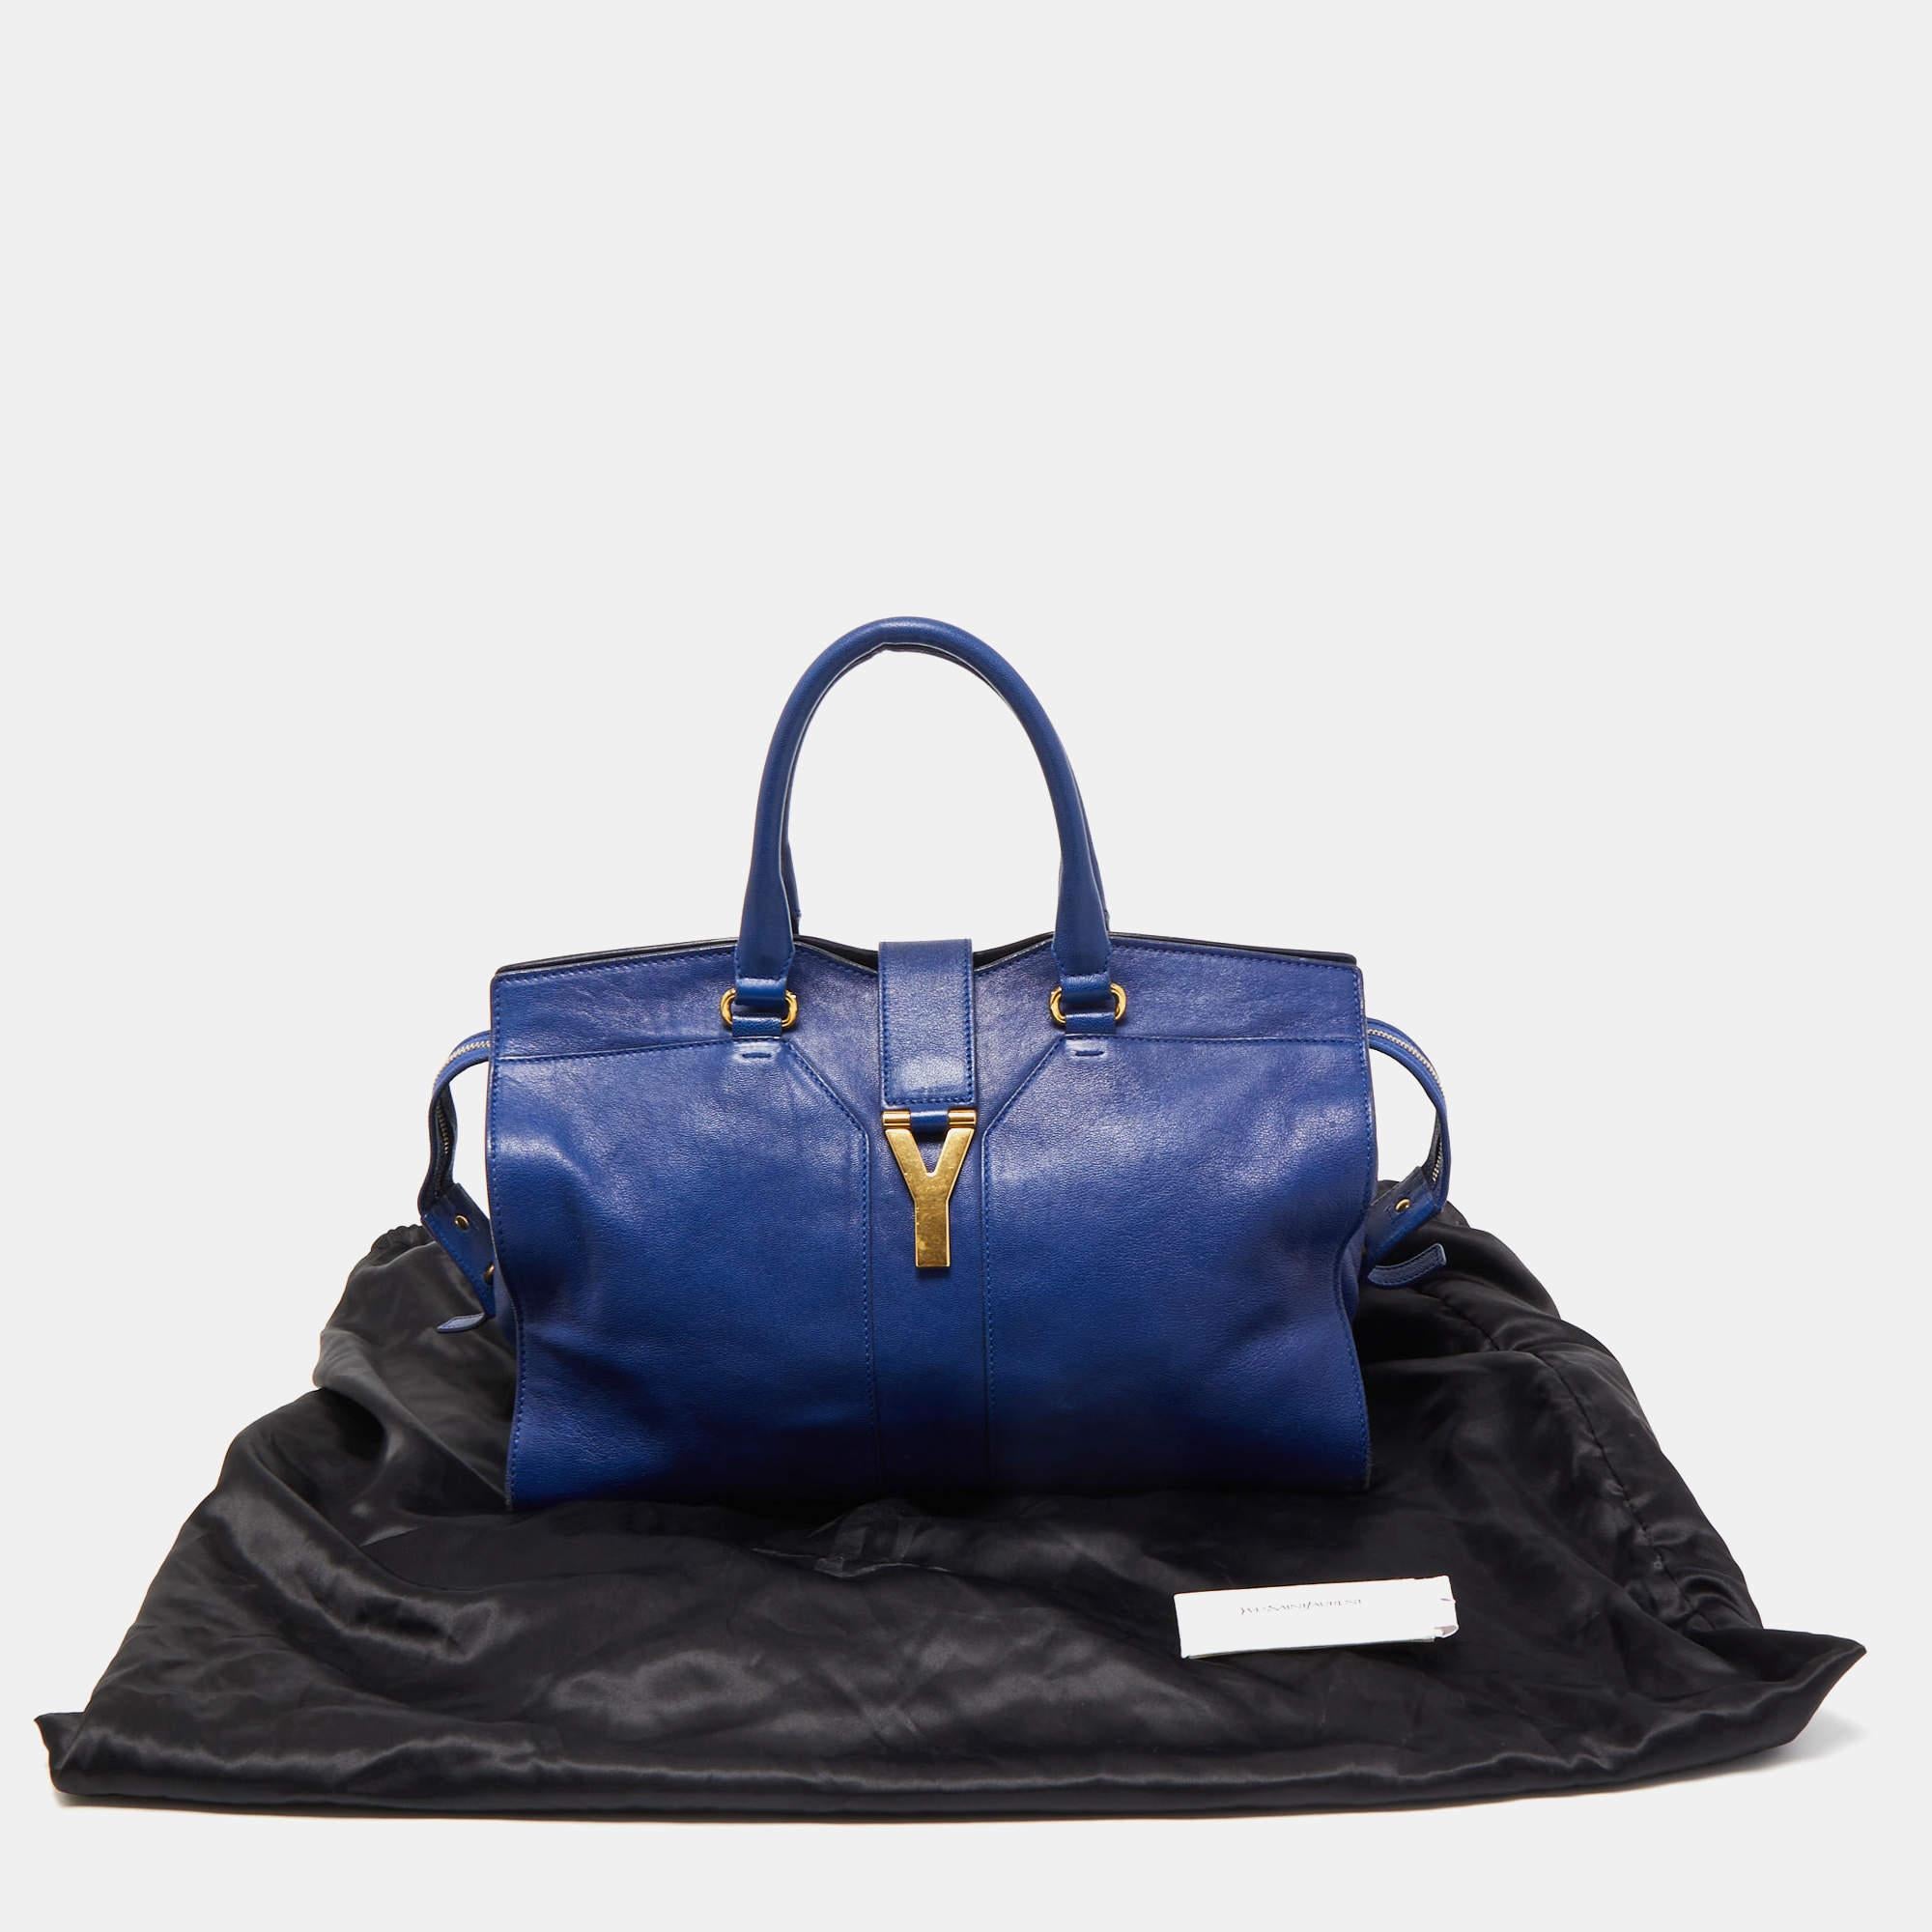 Yves Saint Laurent Blue Leather Medium Cabas Chyc Tote For Sale 3